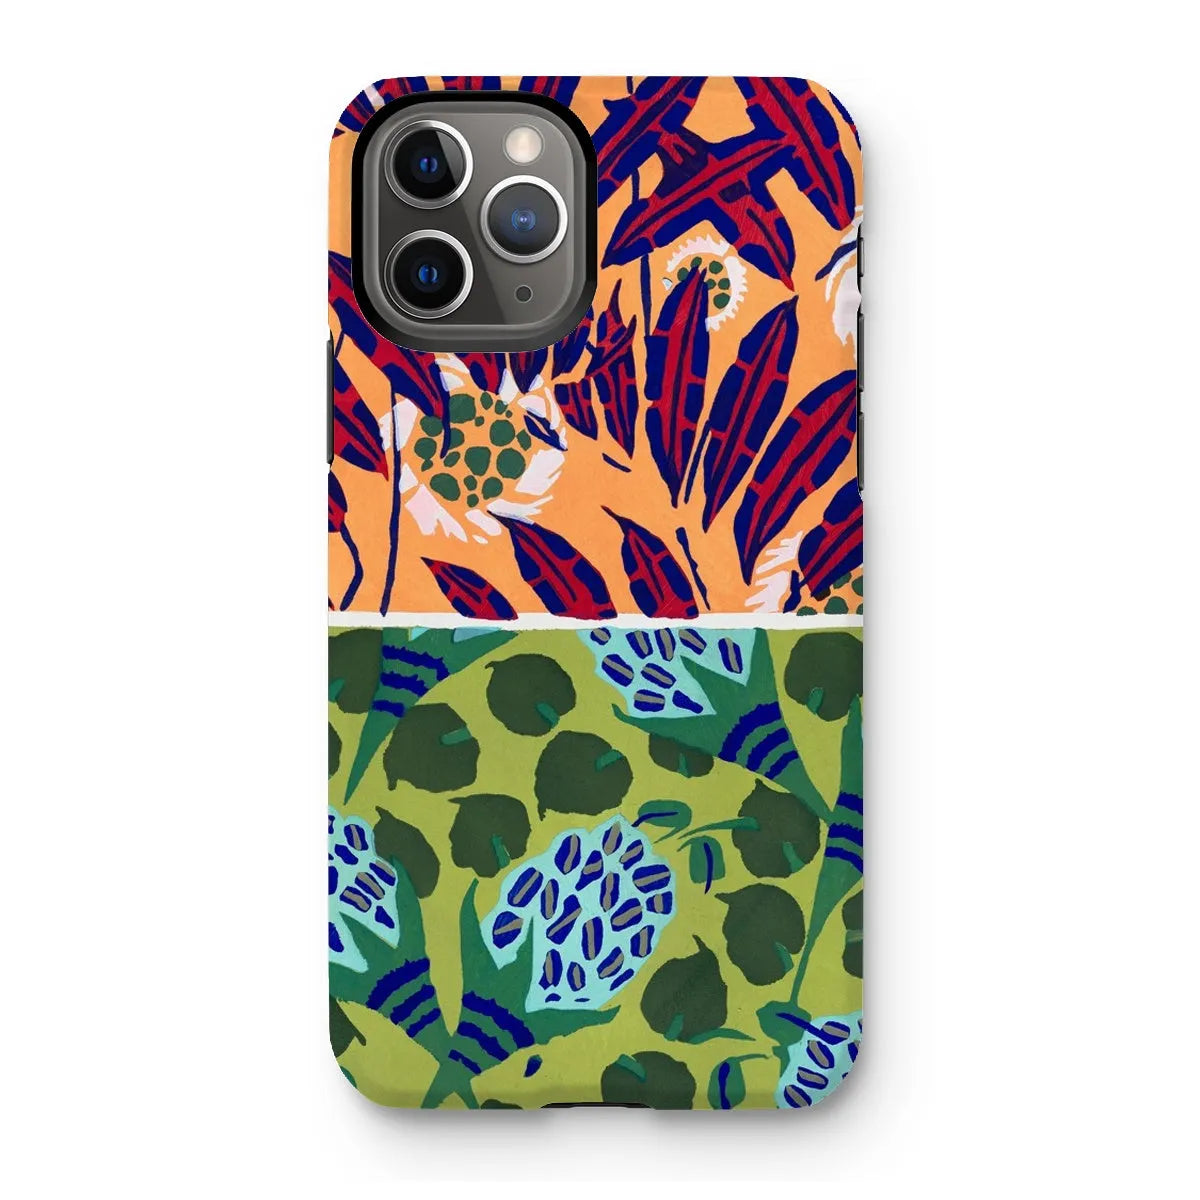 Fabric & Rugs Too - Pochoir Pattern Phone Case - E. A. Séguy - Iphone 11 Pro / Matte - Mobile Phone Cases - Aesthetic